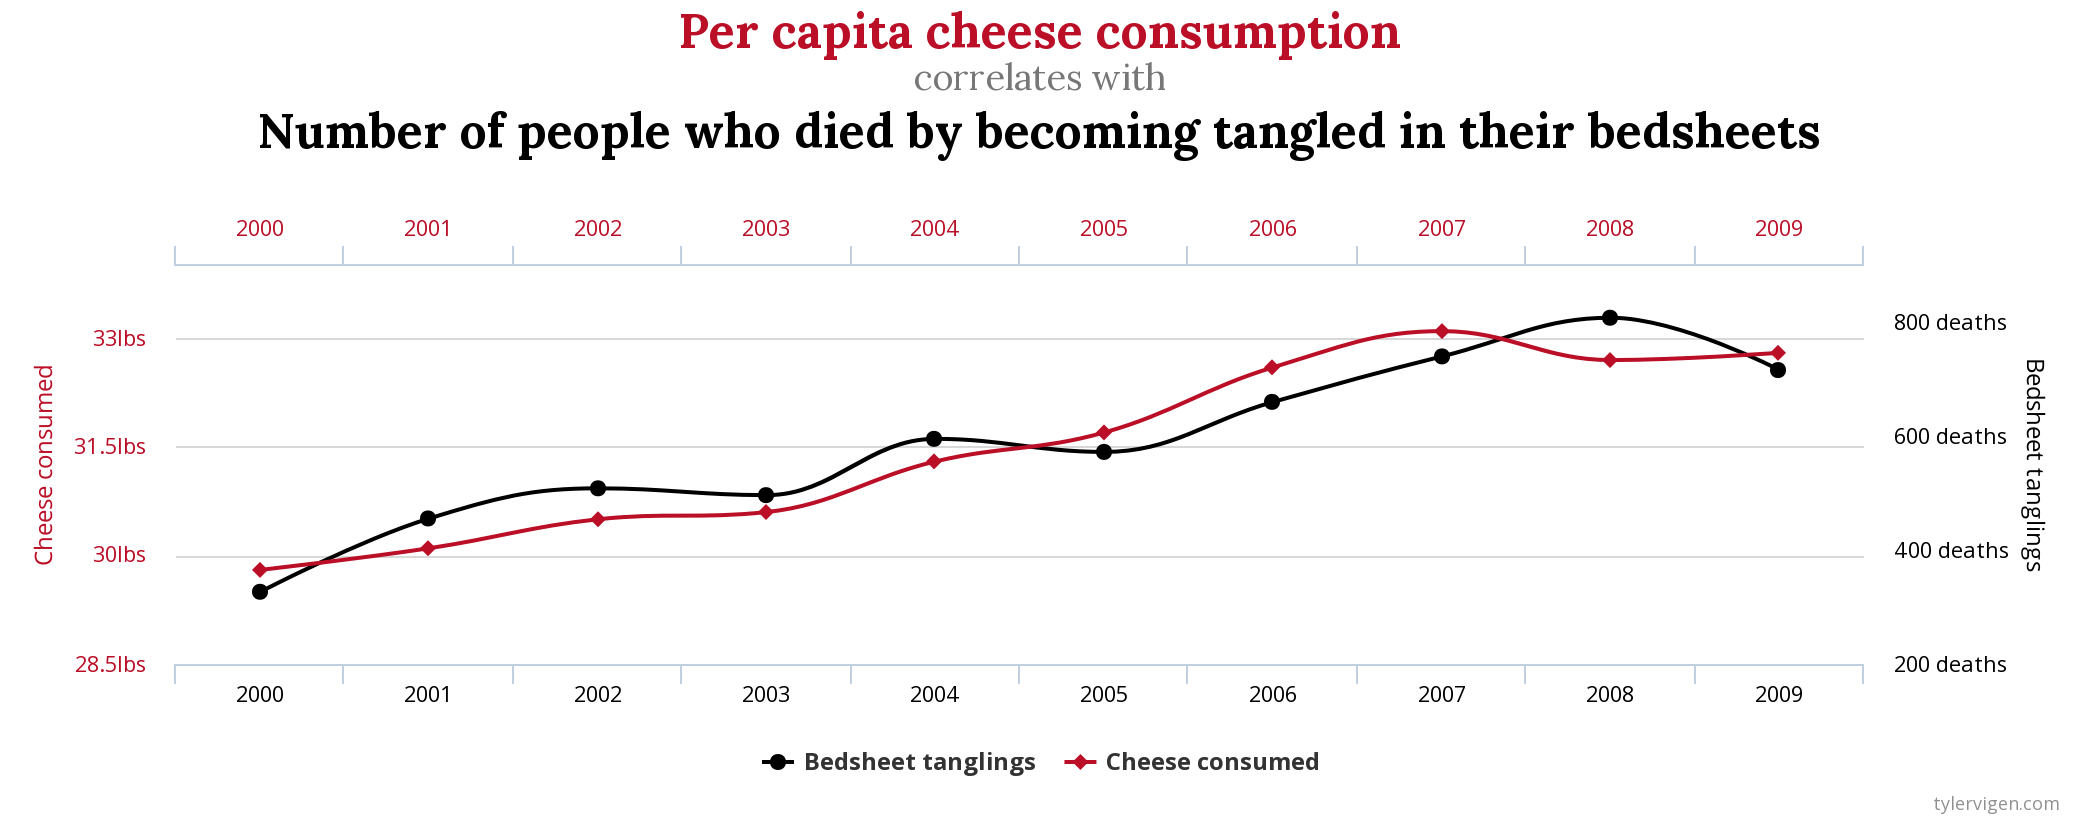 A double y axis chart titled 'Per capita cheese consumption correlates with Number of people who died by becoming tangled in their bedsheets', with a black and a red line seemingly very correlated